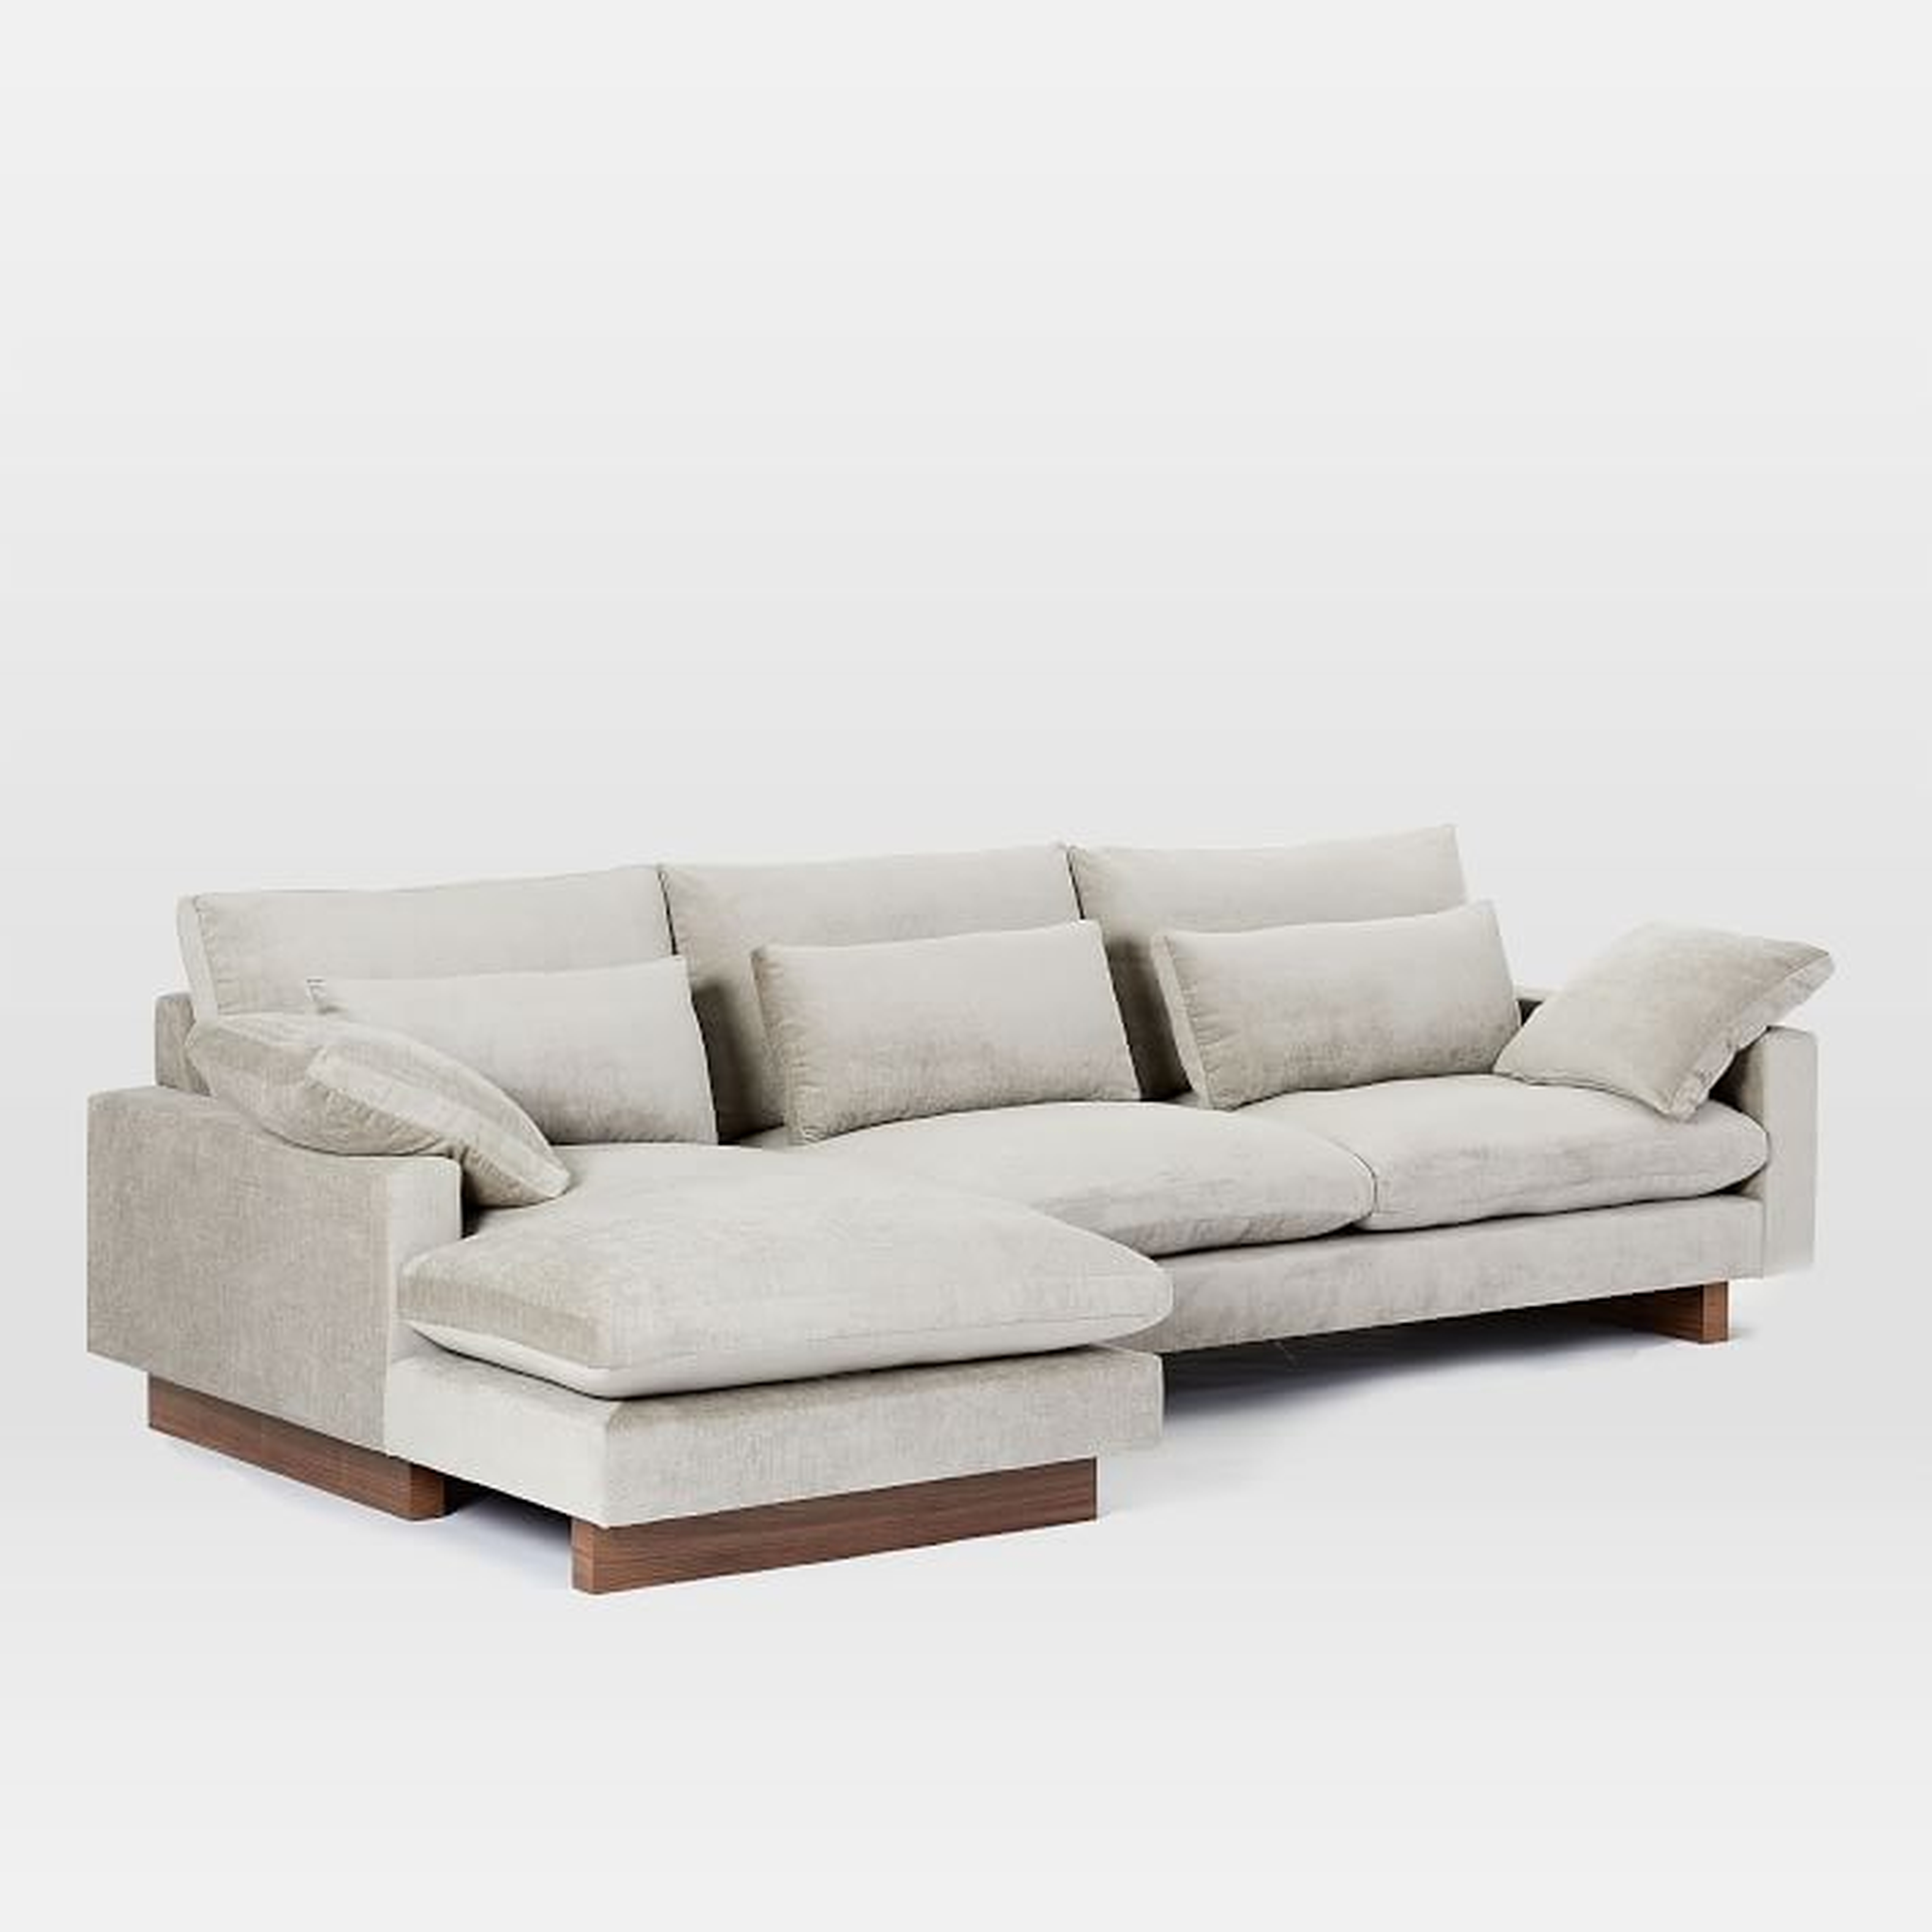 Harmony 2-Piece Chaise Sectional Left 2-Piece Chaise Sectional - West Elm